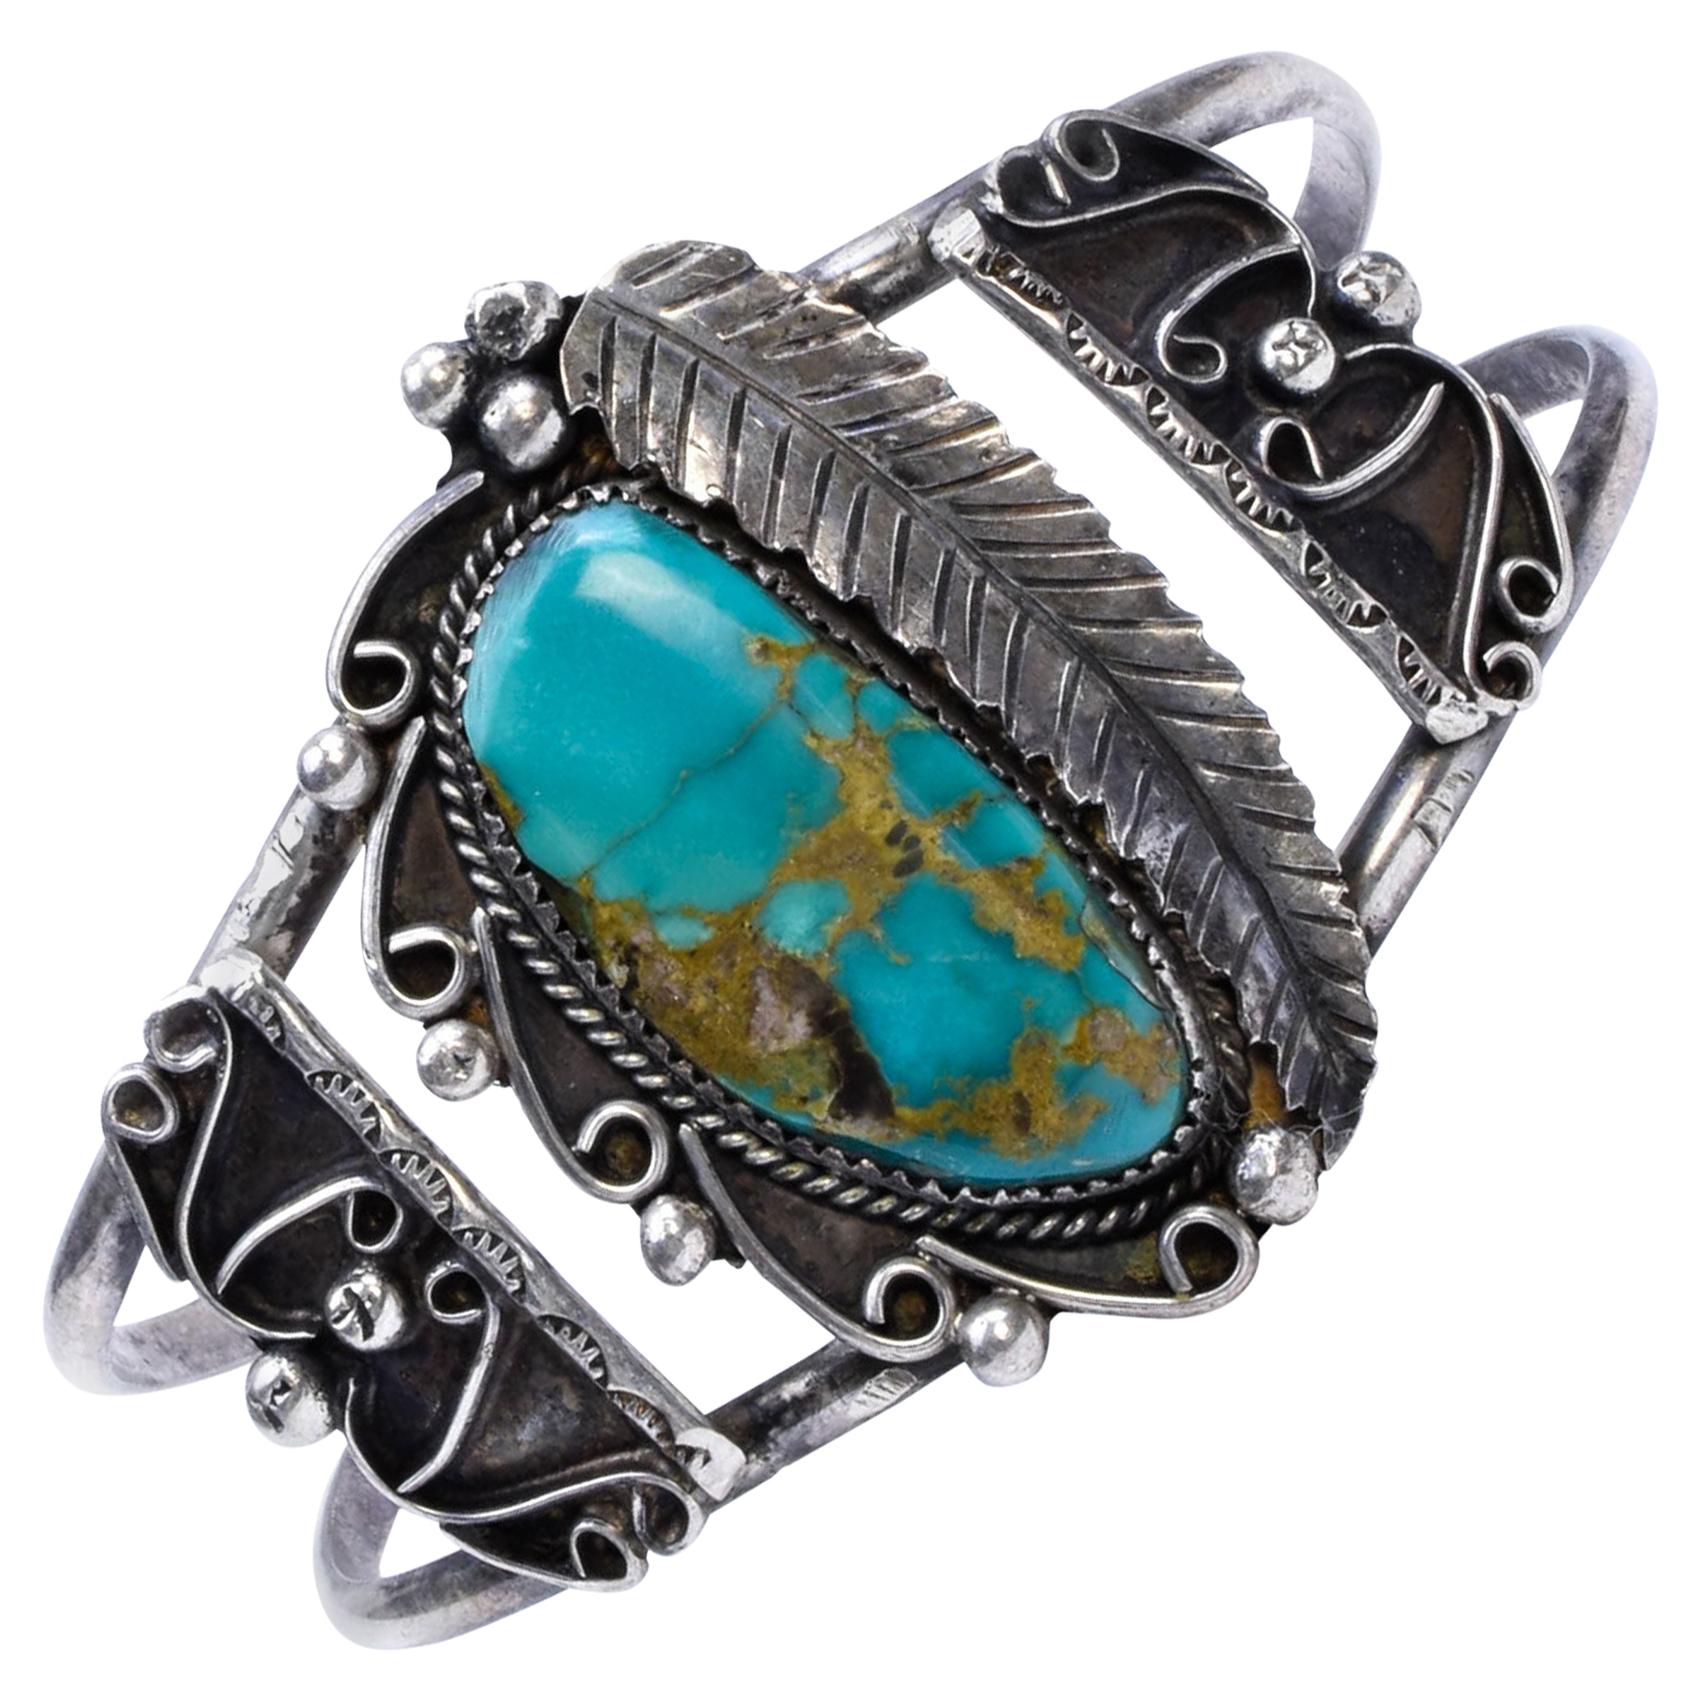 Navajo Cerrillos Turquoise and Sterling Bracelet